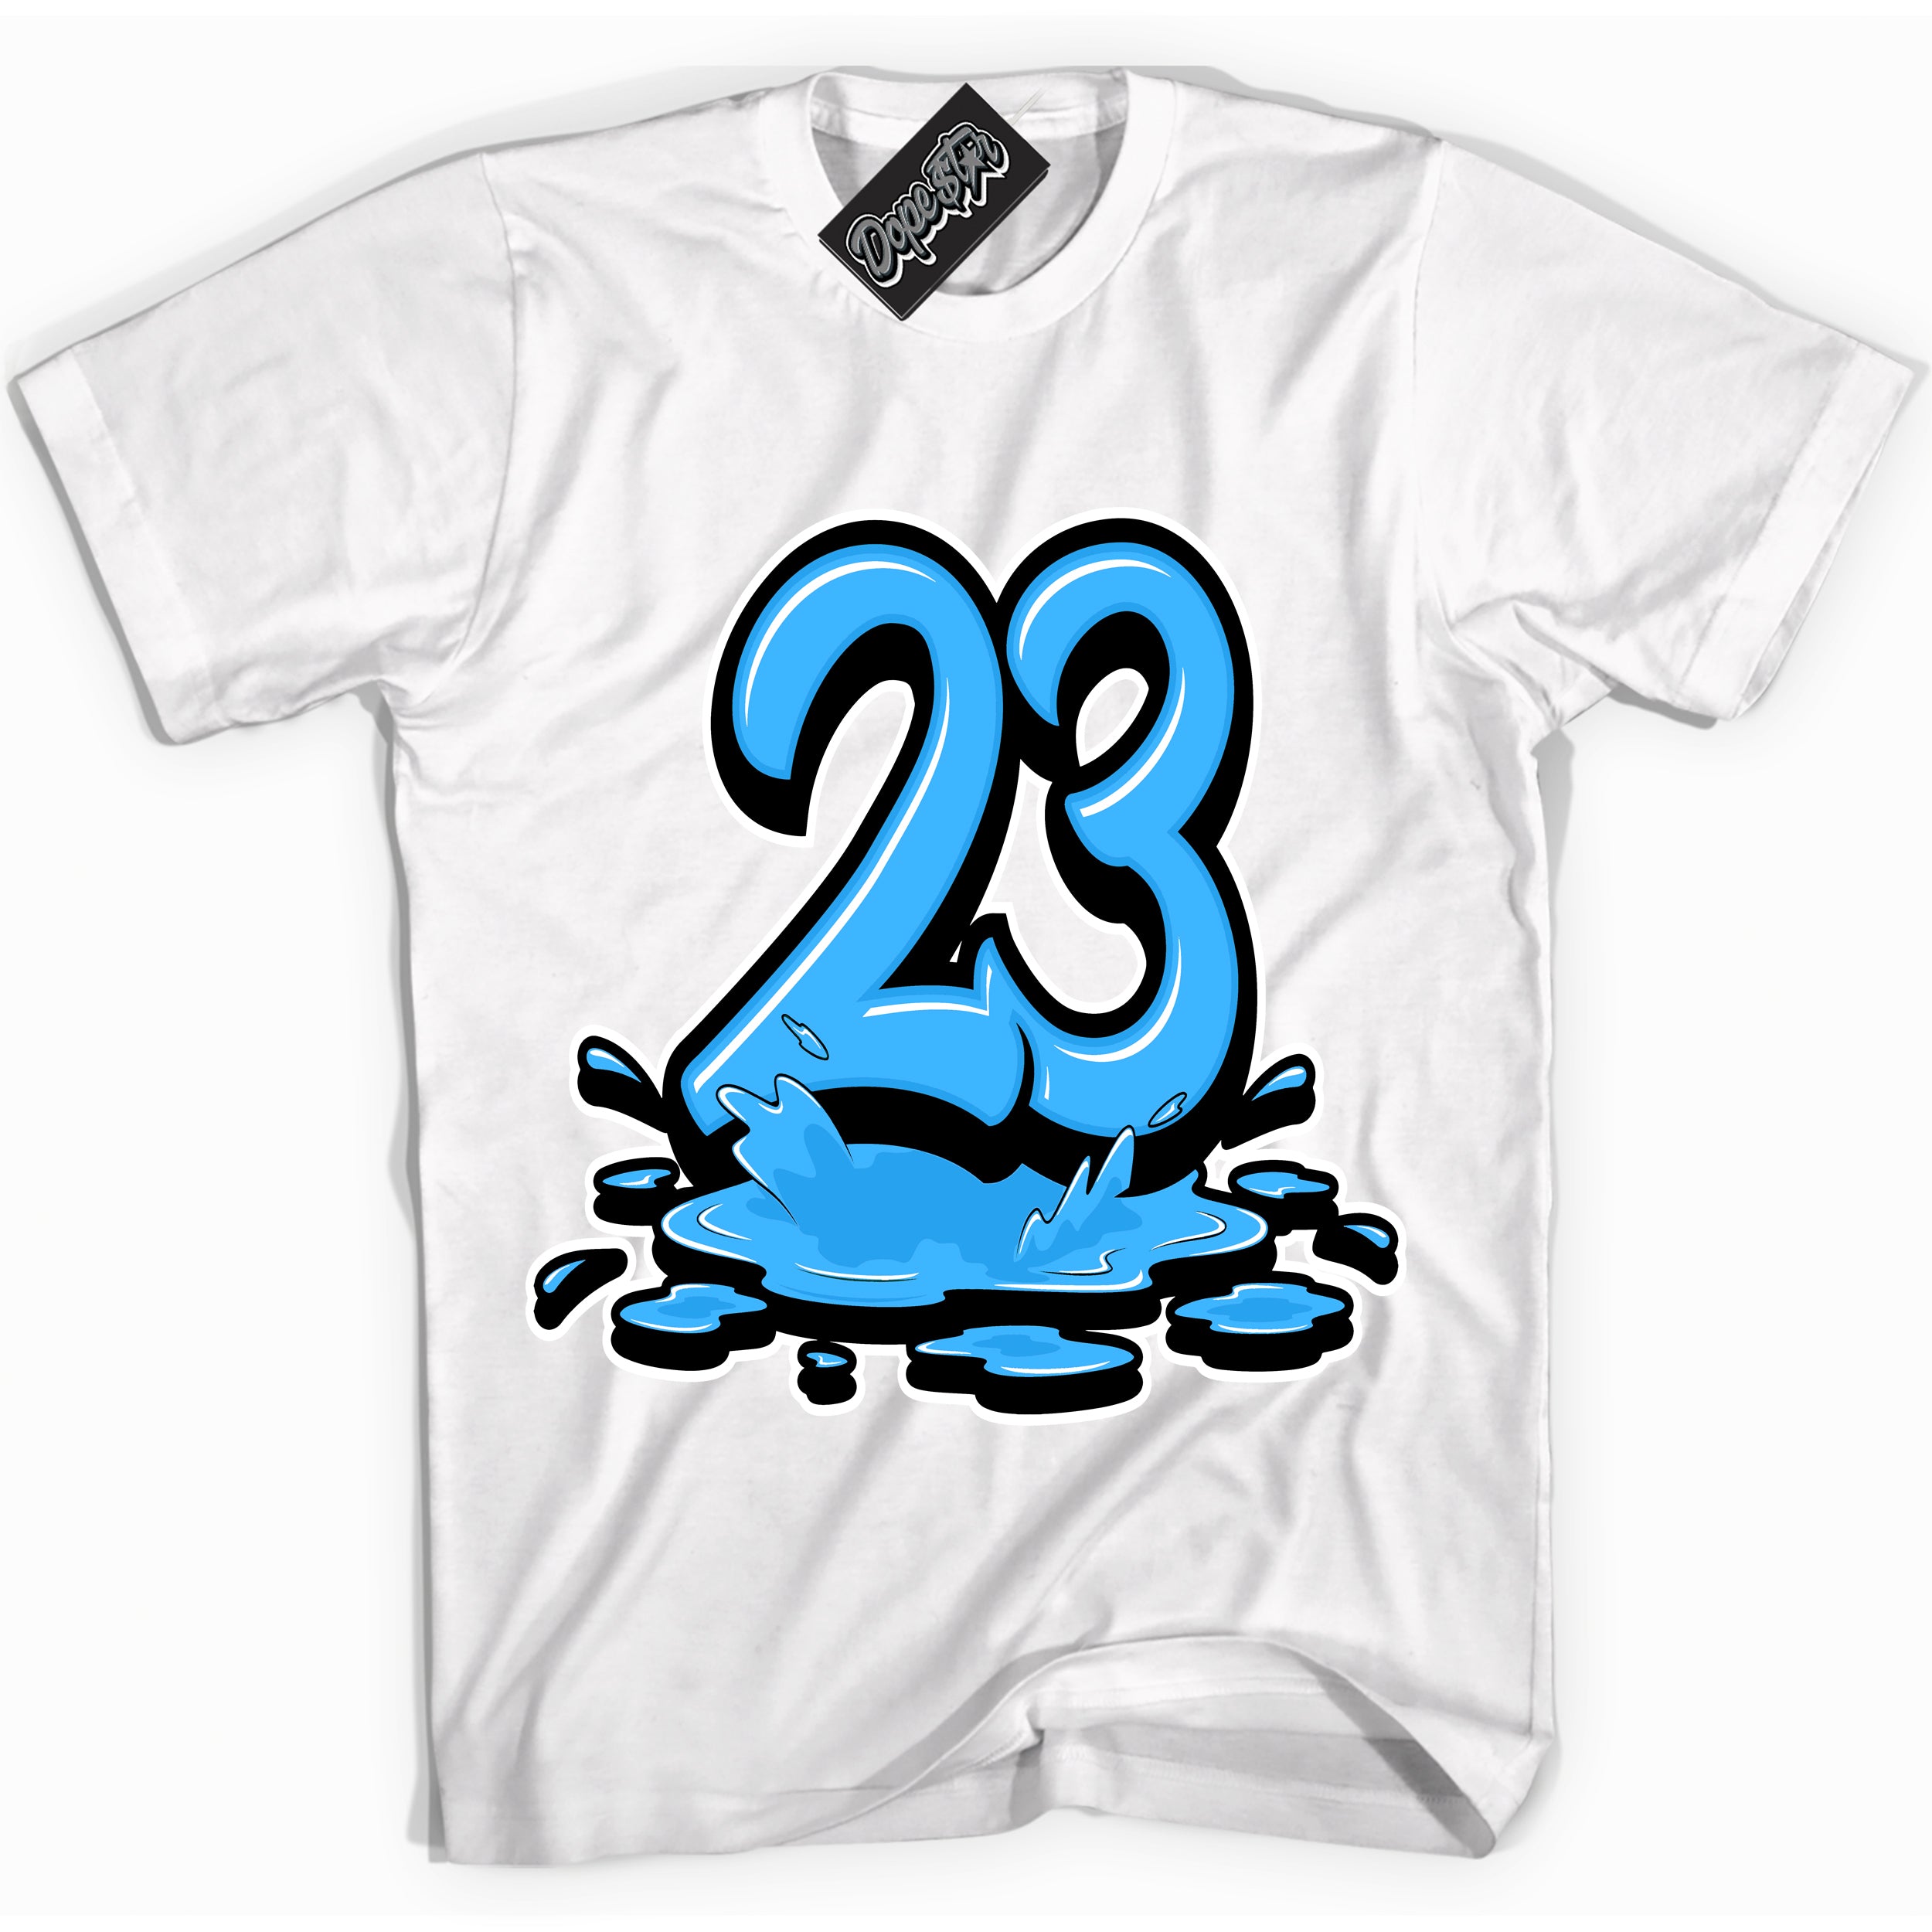 Cool White graphic tee with “ 23 Melting ” design, that perfectly matches Powder Blue 9s sneakers 